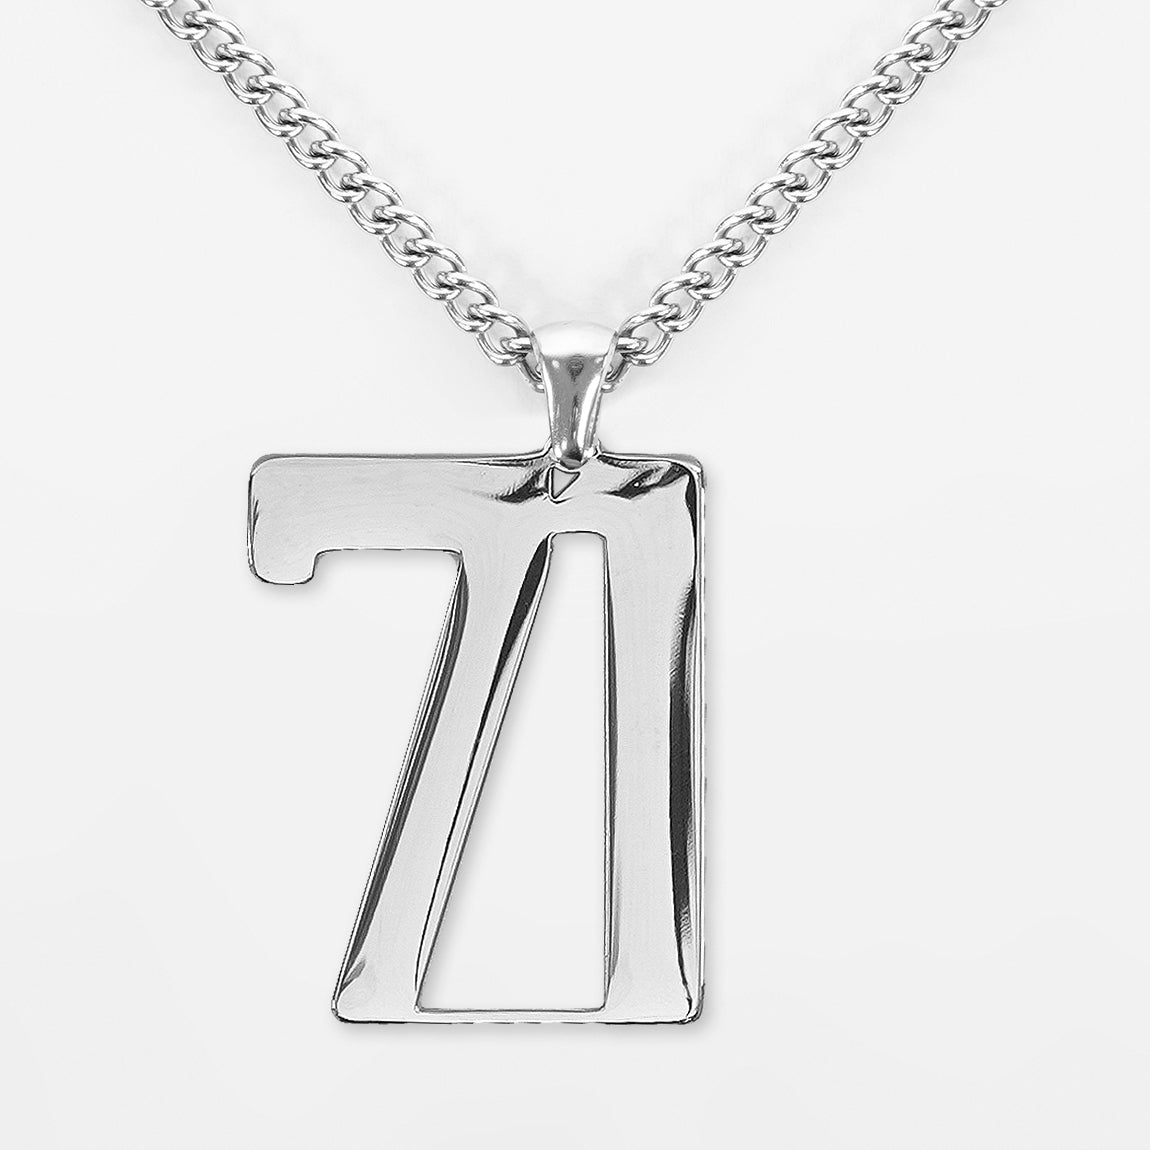 71 Number Pendant with Chain Necklace - Stainless Steel